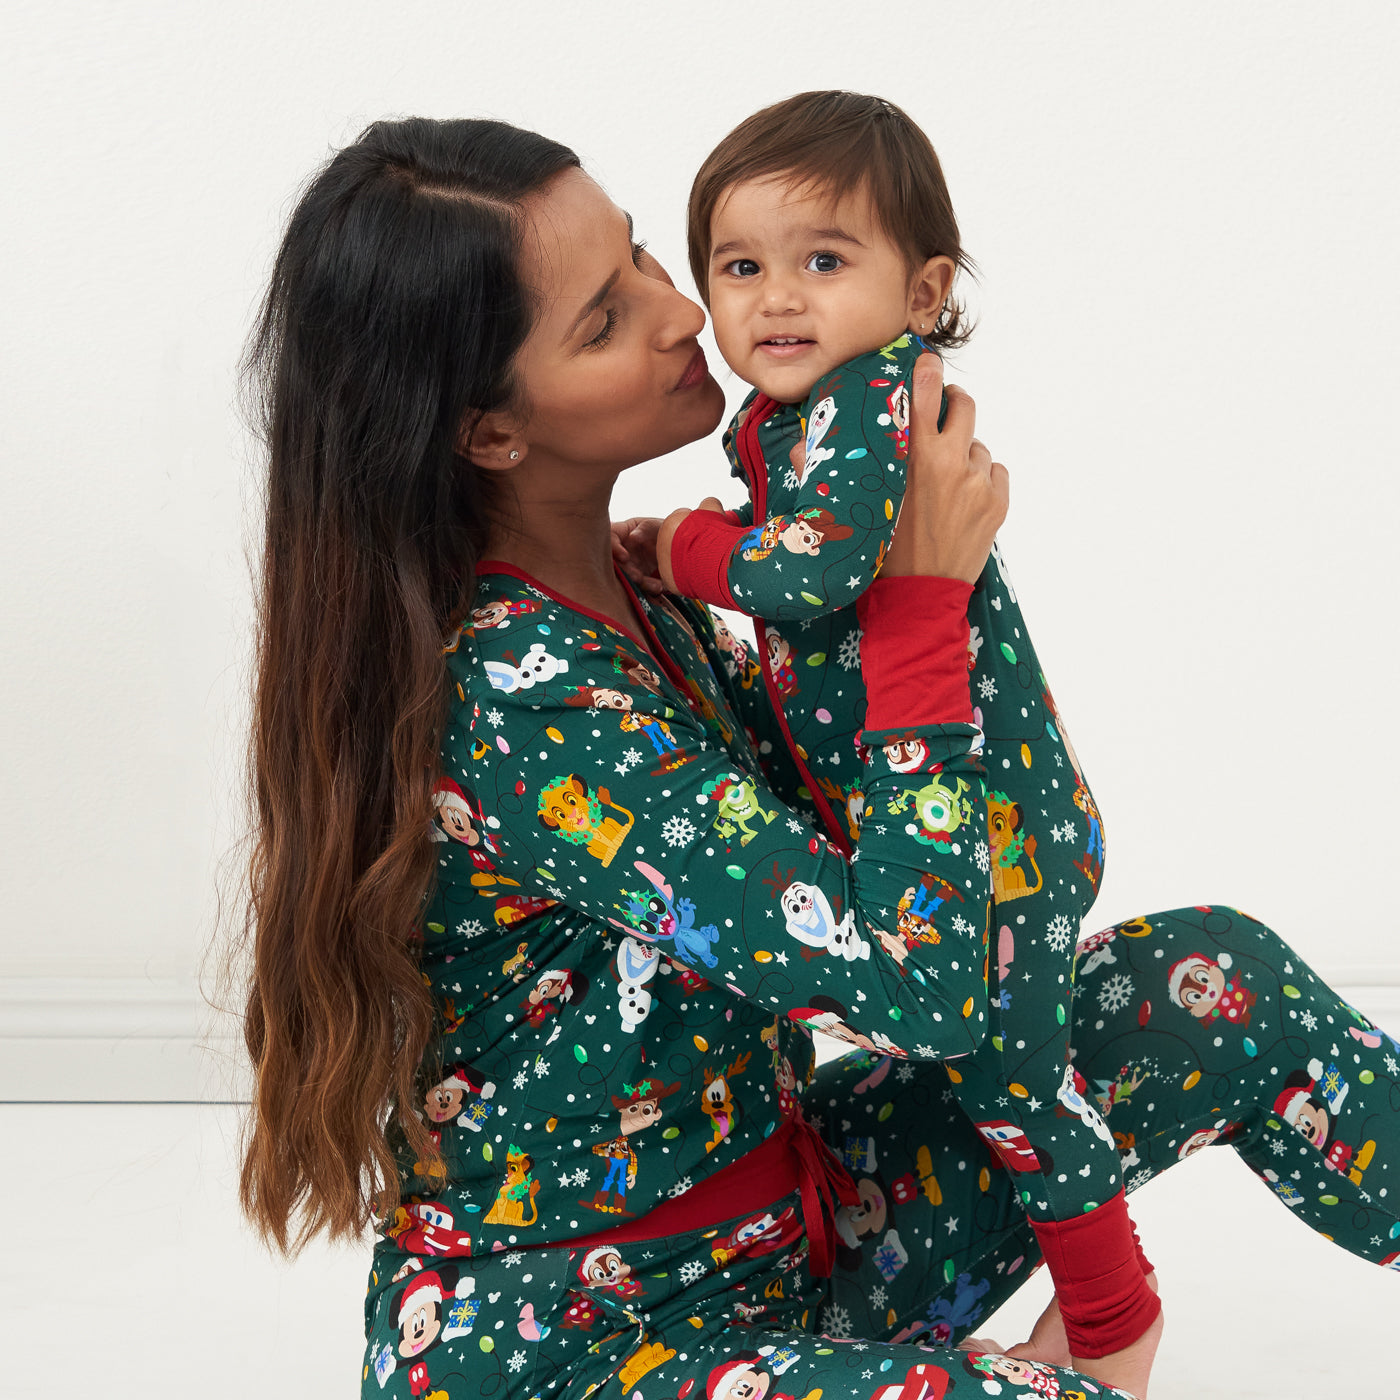 Mother and child wearing matching Disney Christmas Party pajamas